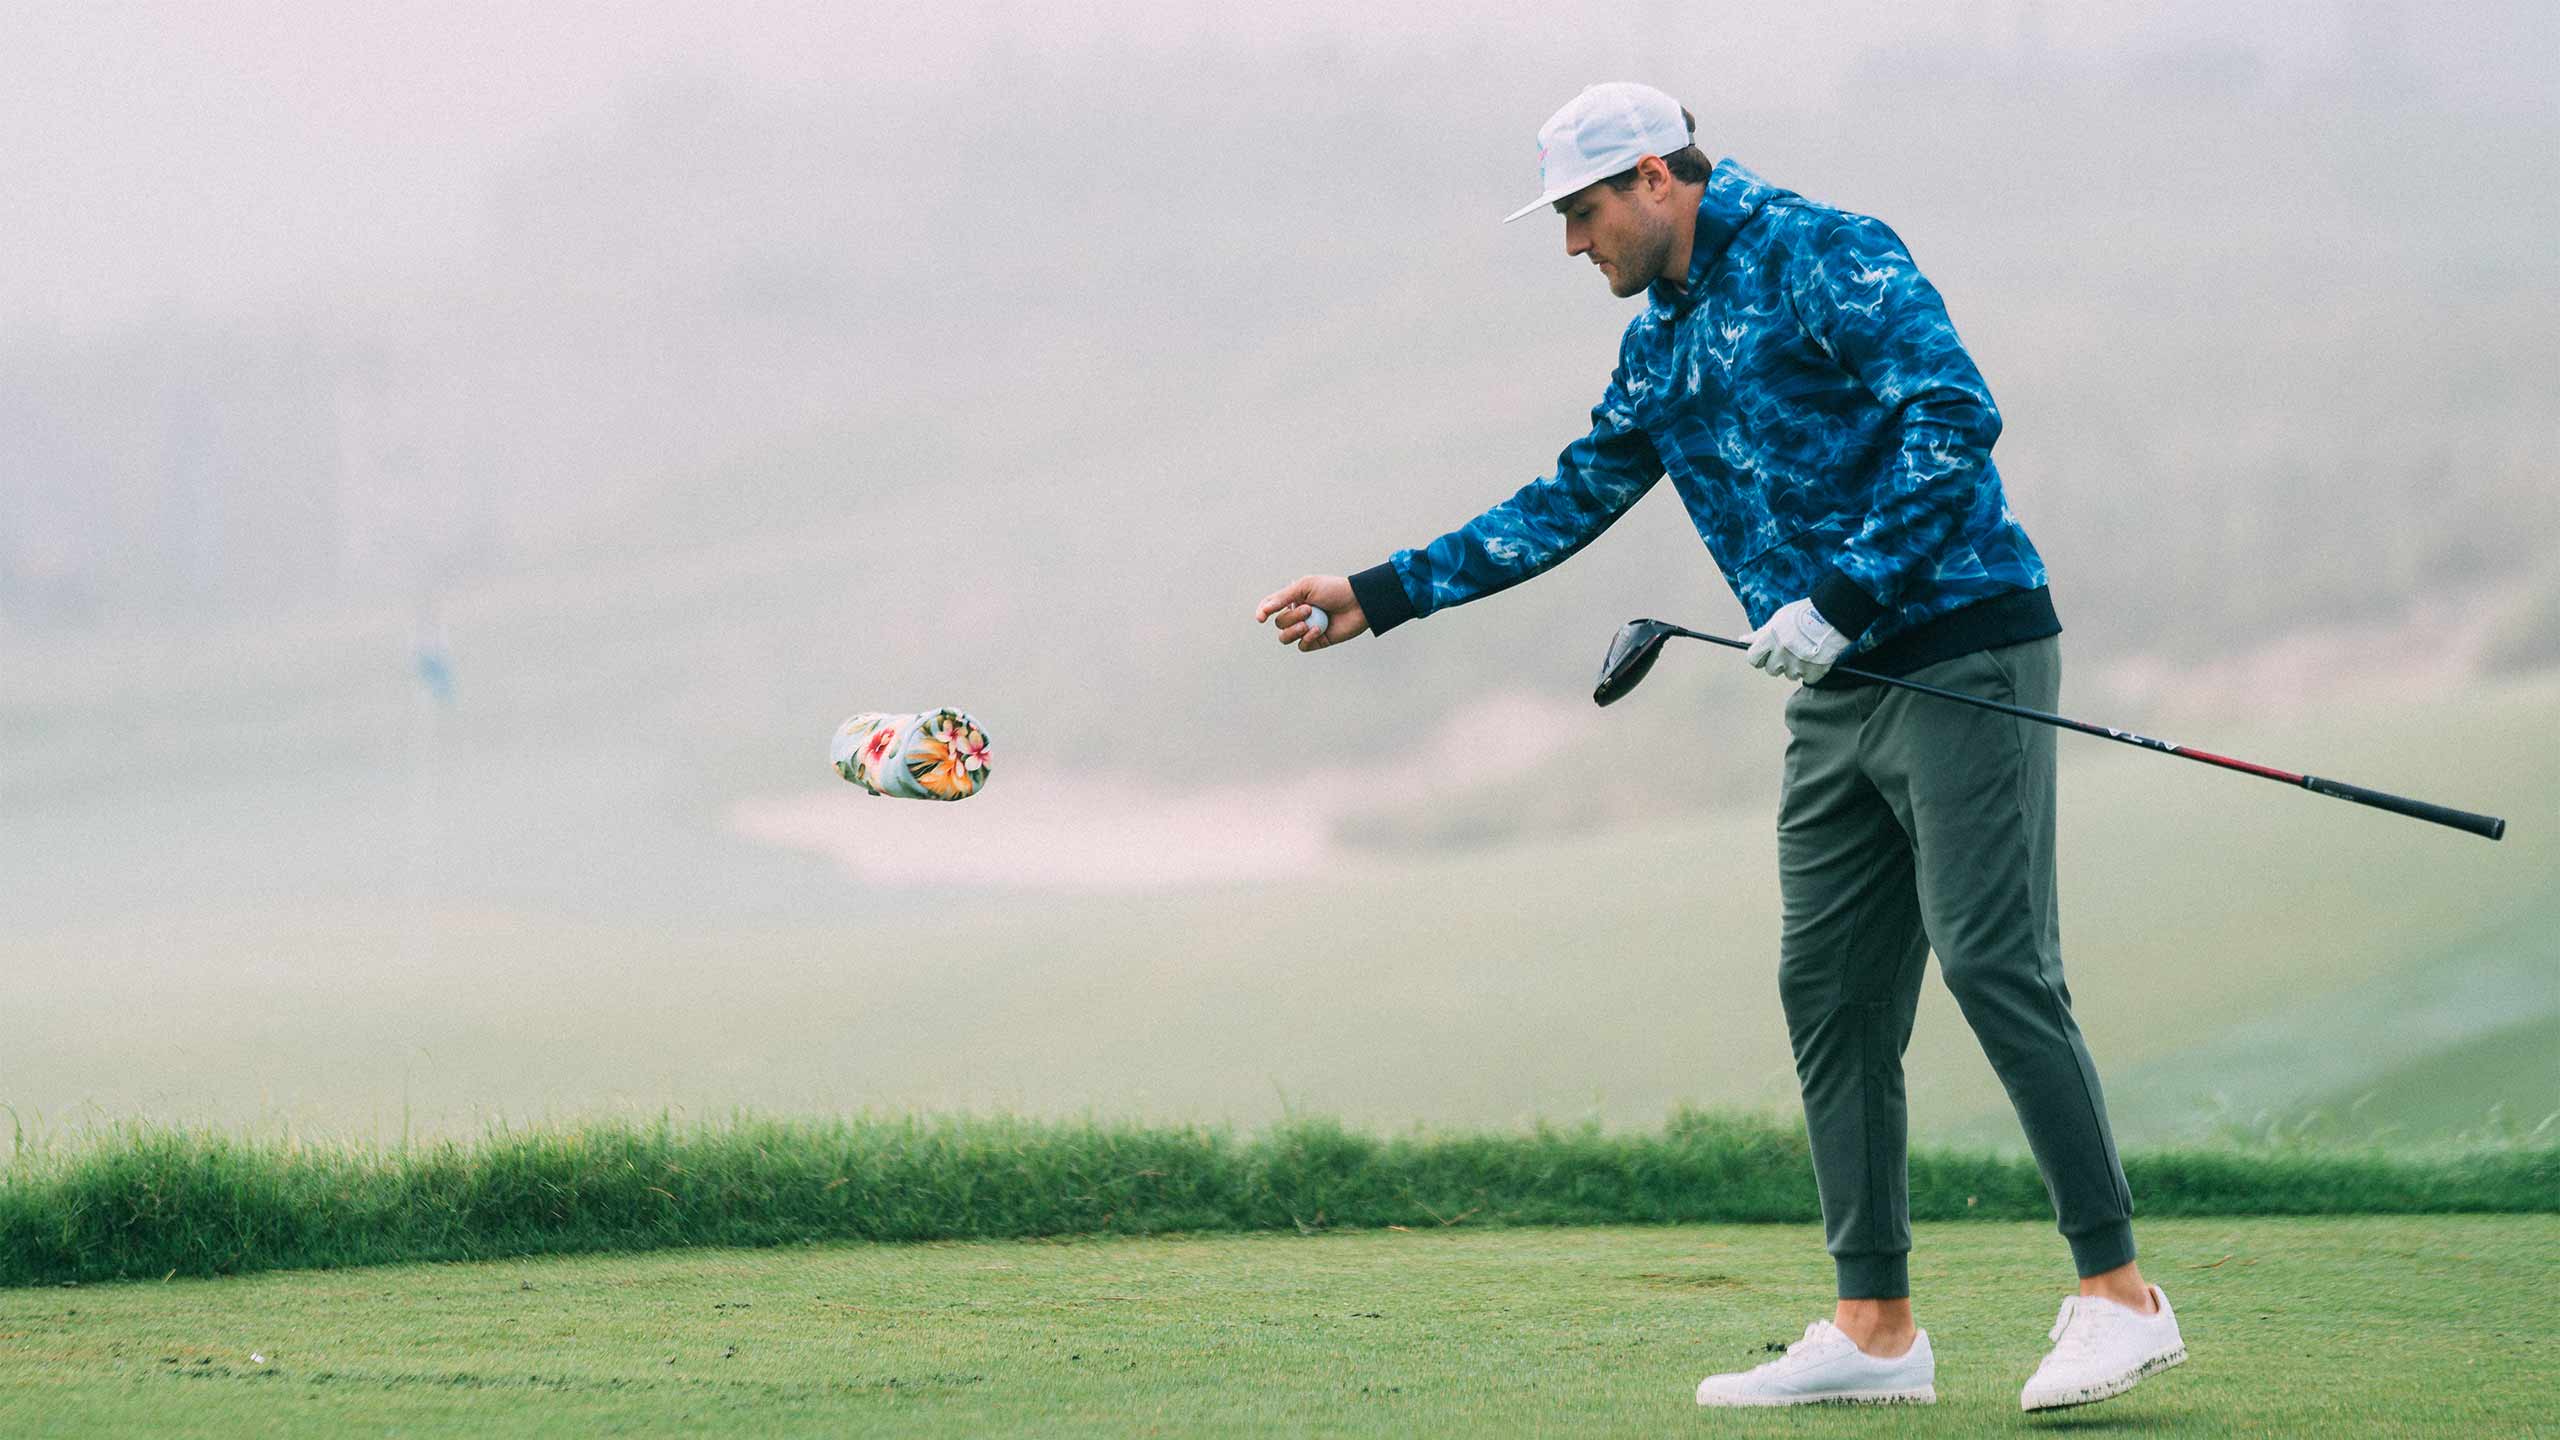 GOLF Fall 2020 Style Guide: A primer to look great on and off the course